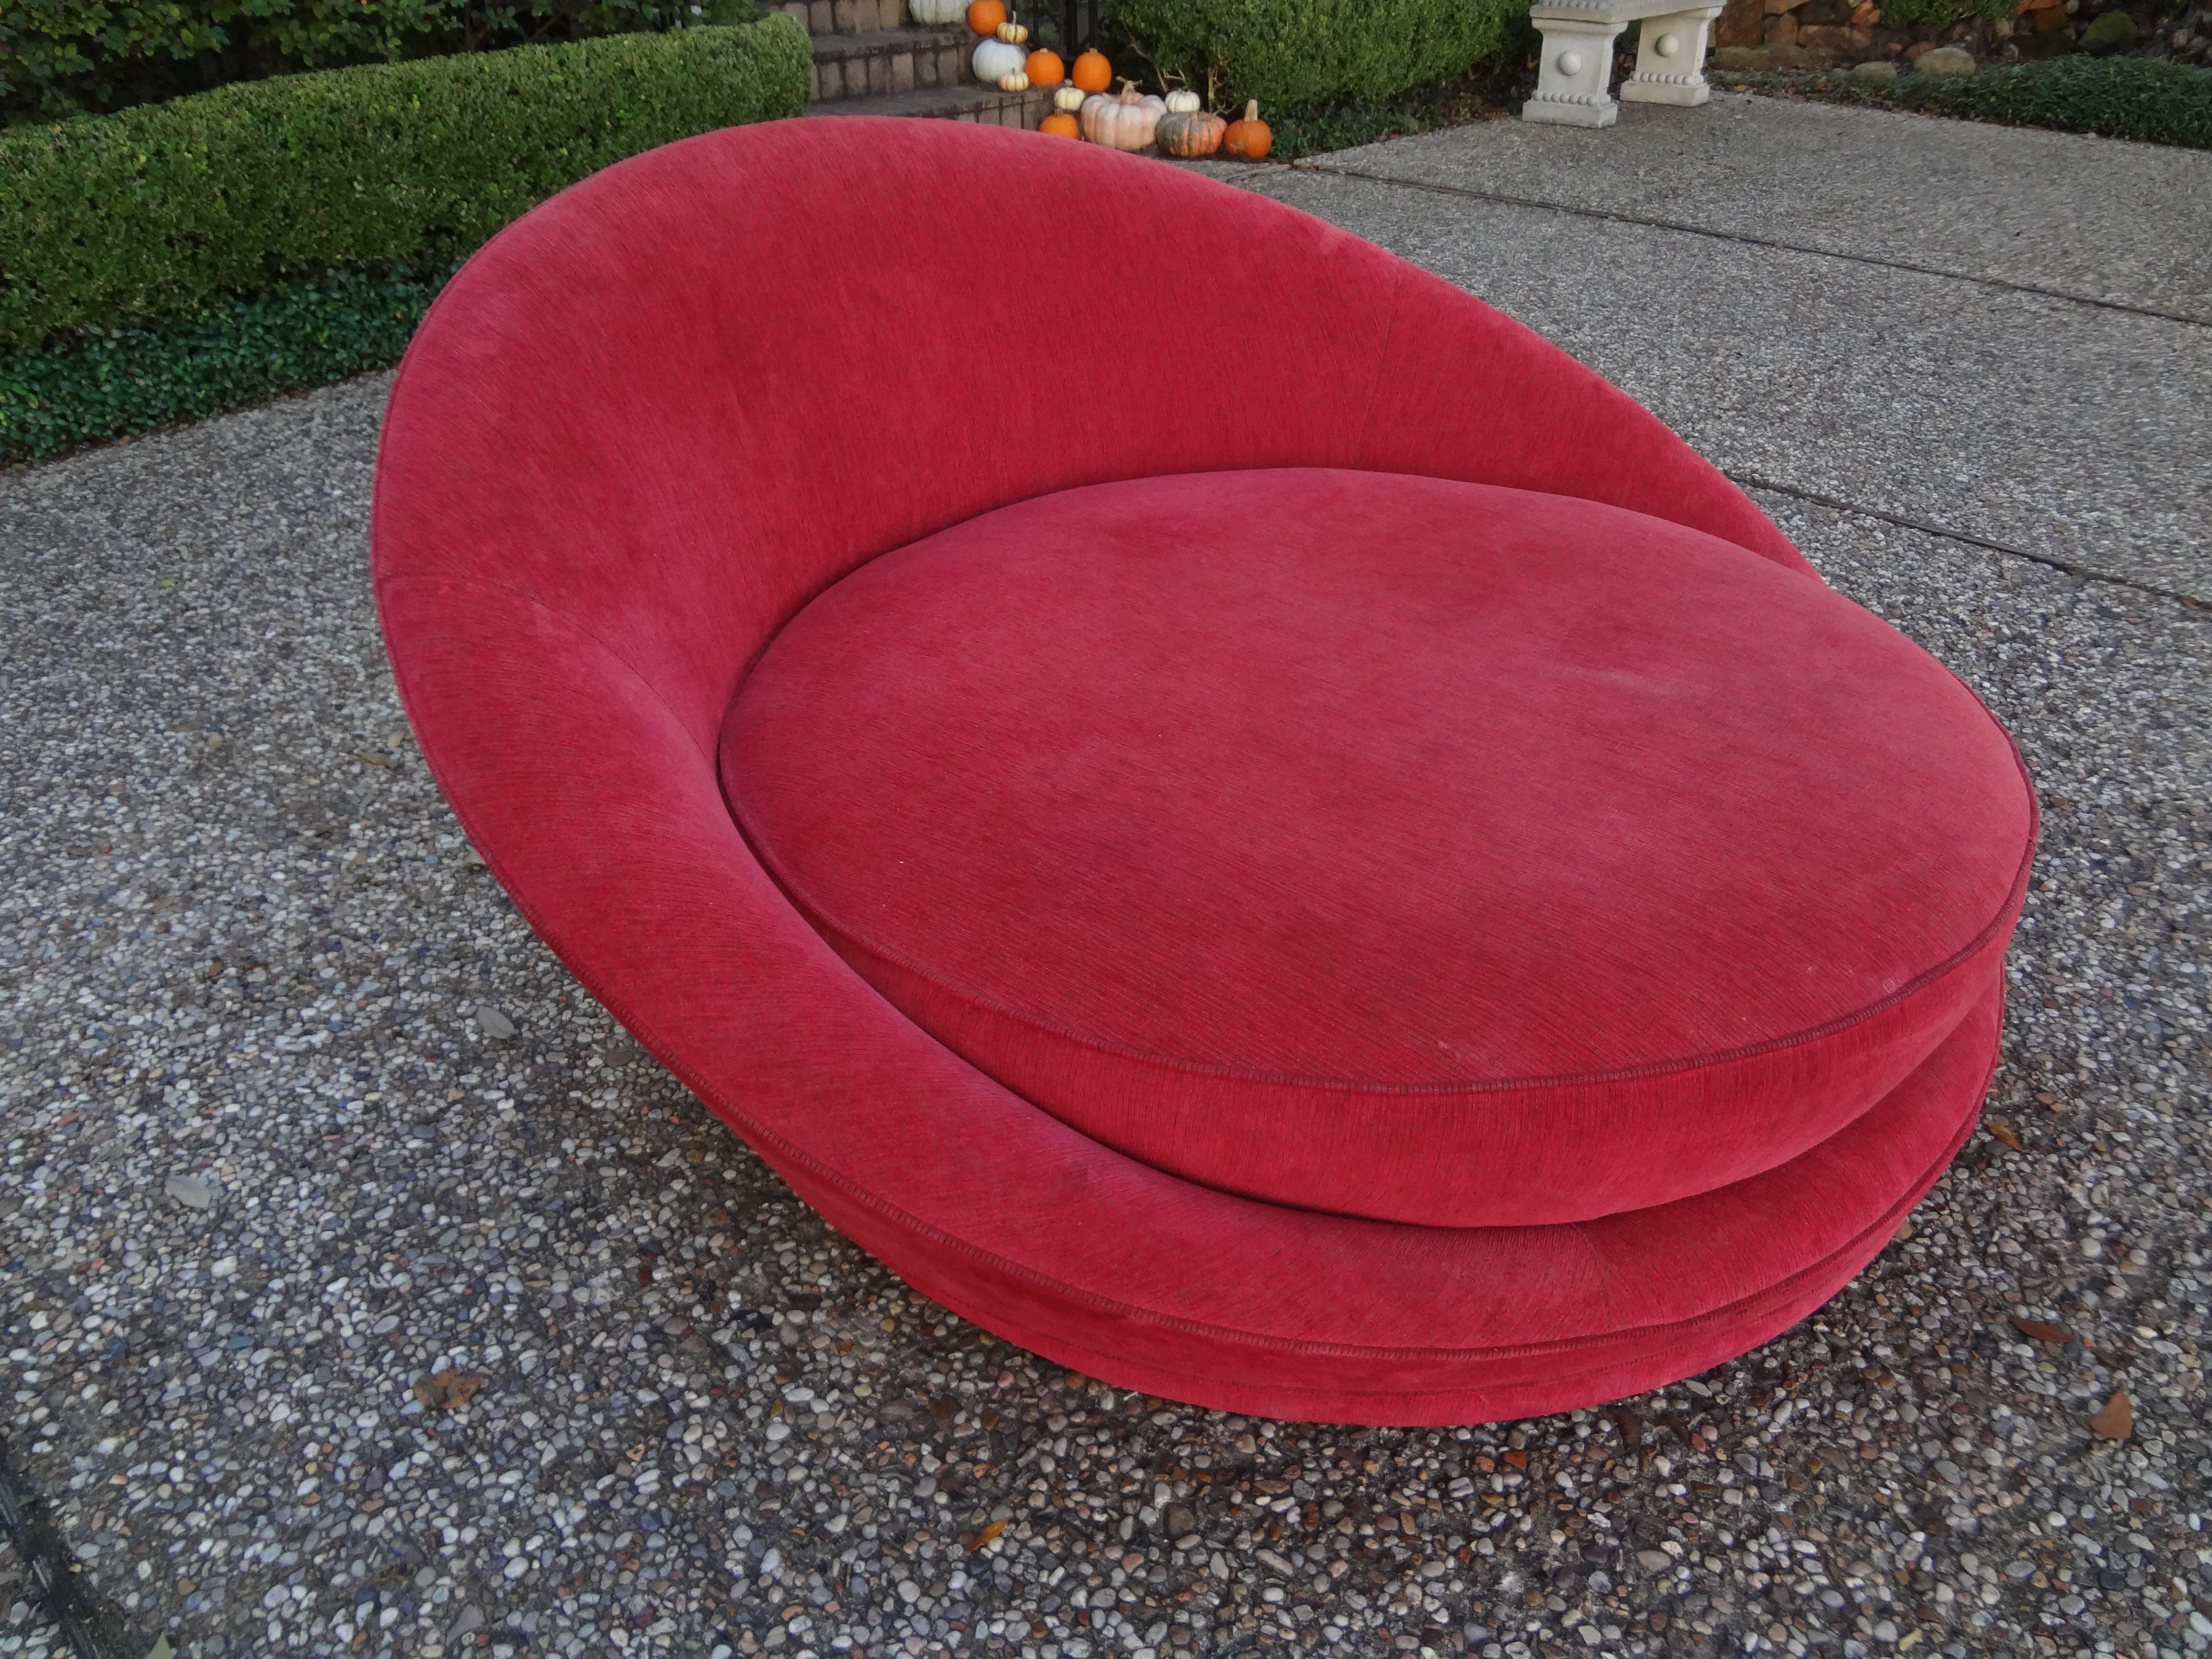 Fantastic large Mid-Century Modern sculptural round chaise or satellite chair by Milo Baughman, circa. 1965.
This lounge chair is most comfortable and will accommodate two.
In great structural condition and ready for new upholstery.